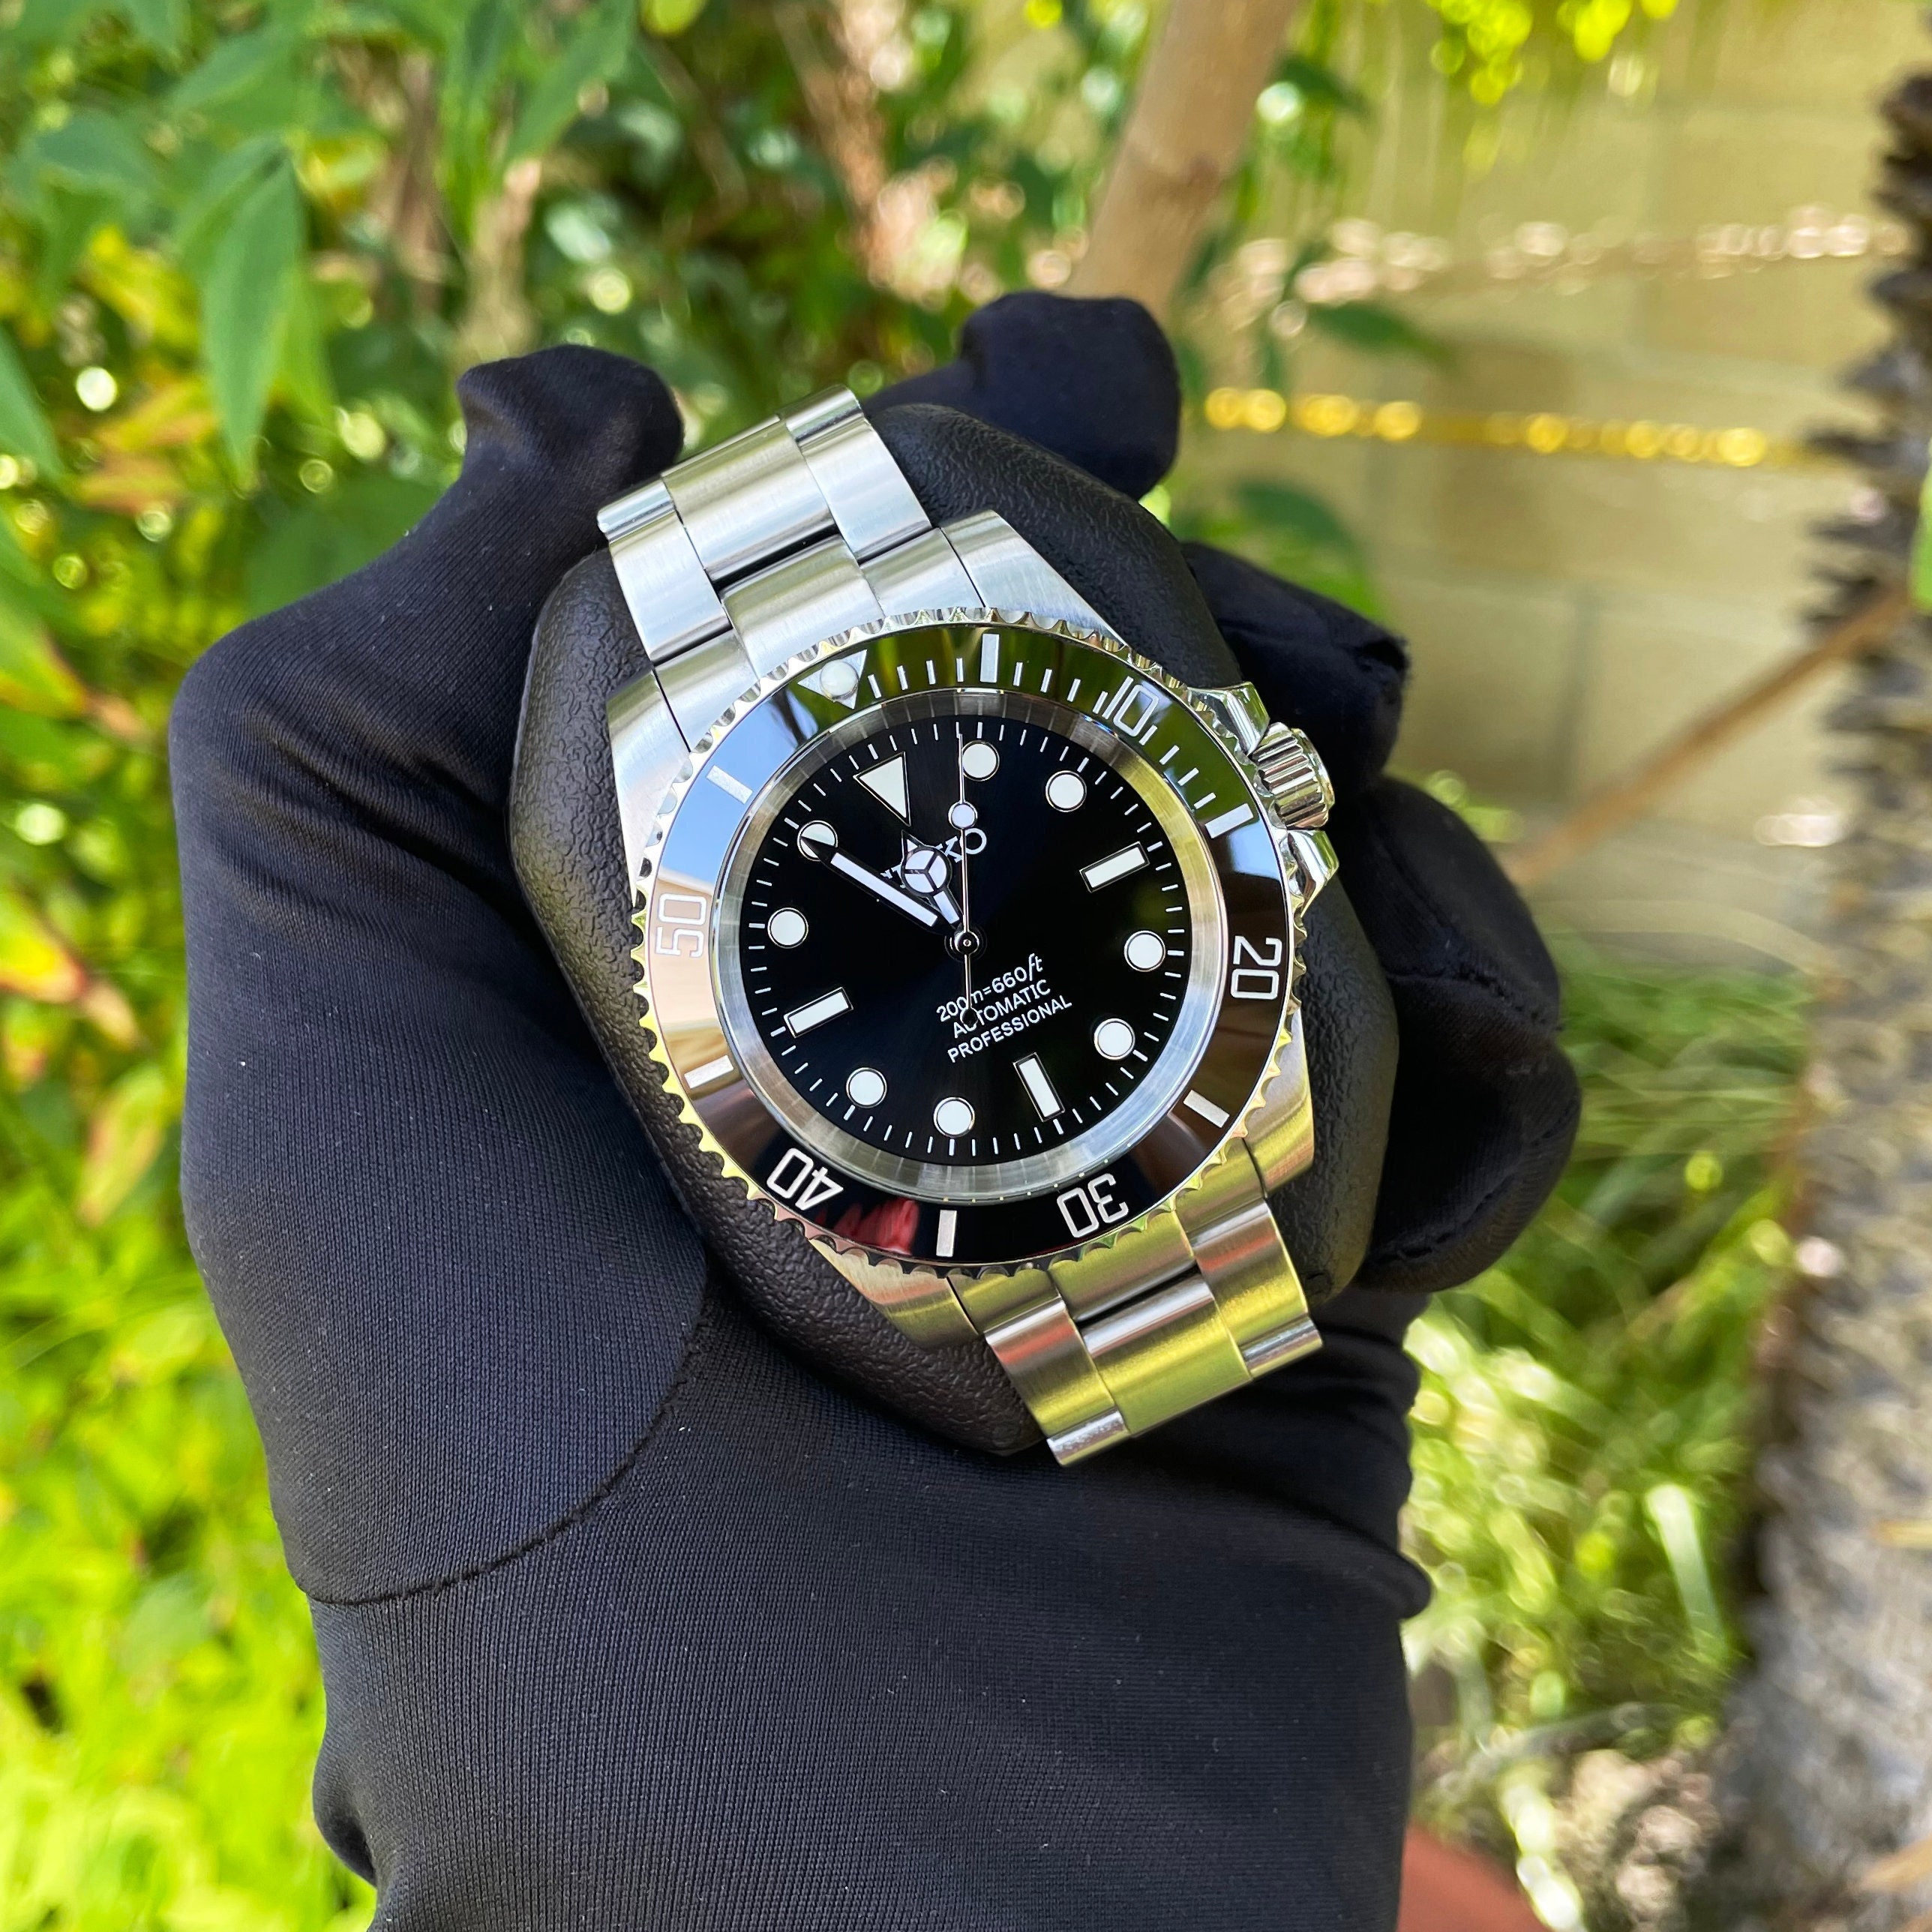 40mm 200 Meter Submariner Black No Date Style Diver Mod Watch - Etsy